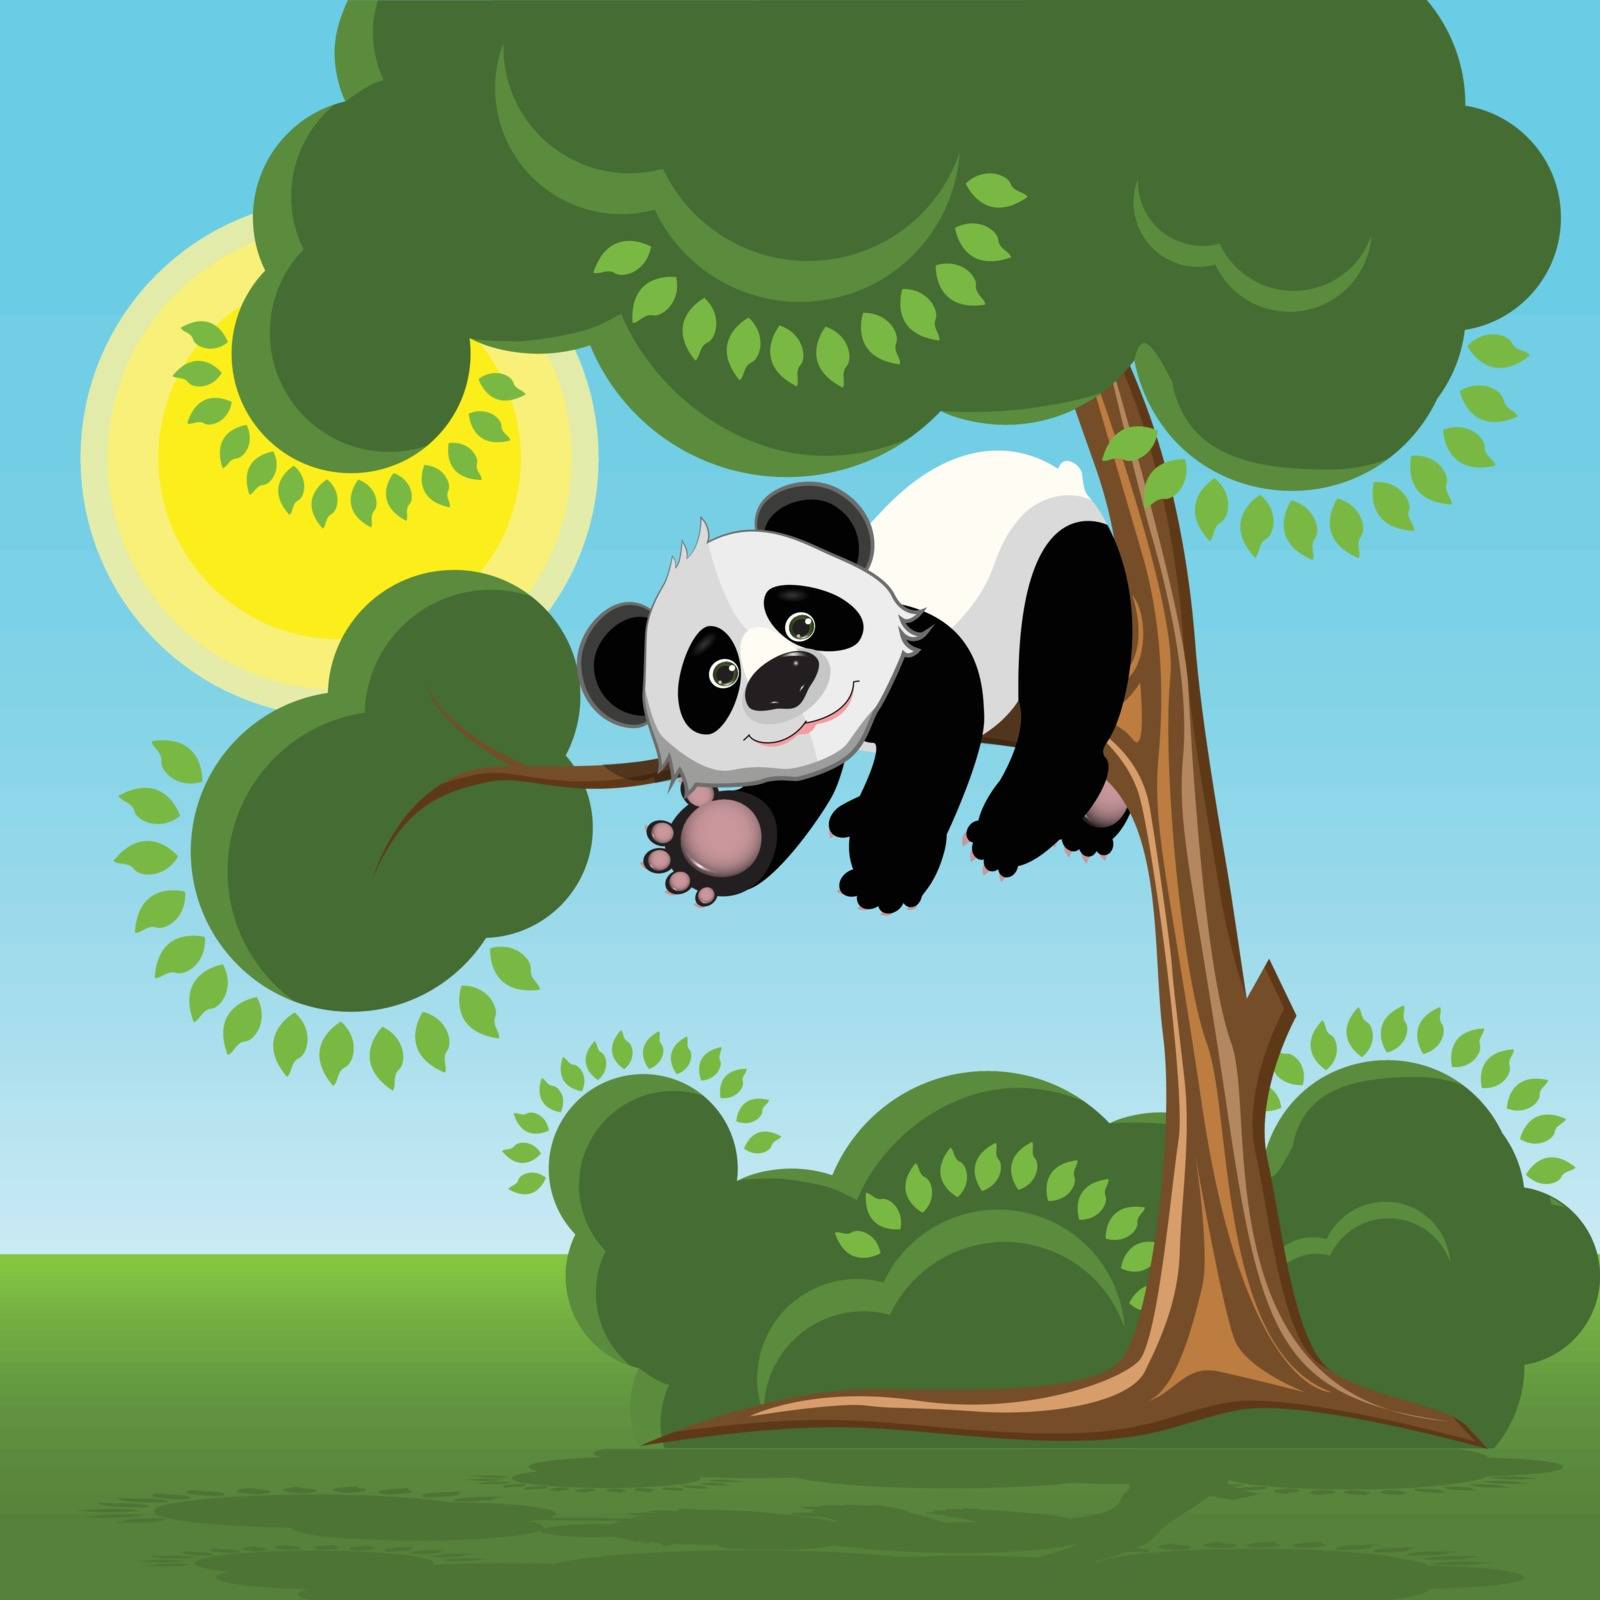 Panda on the Tree illustration by brux